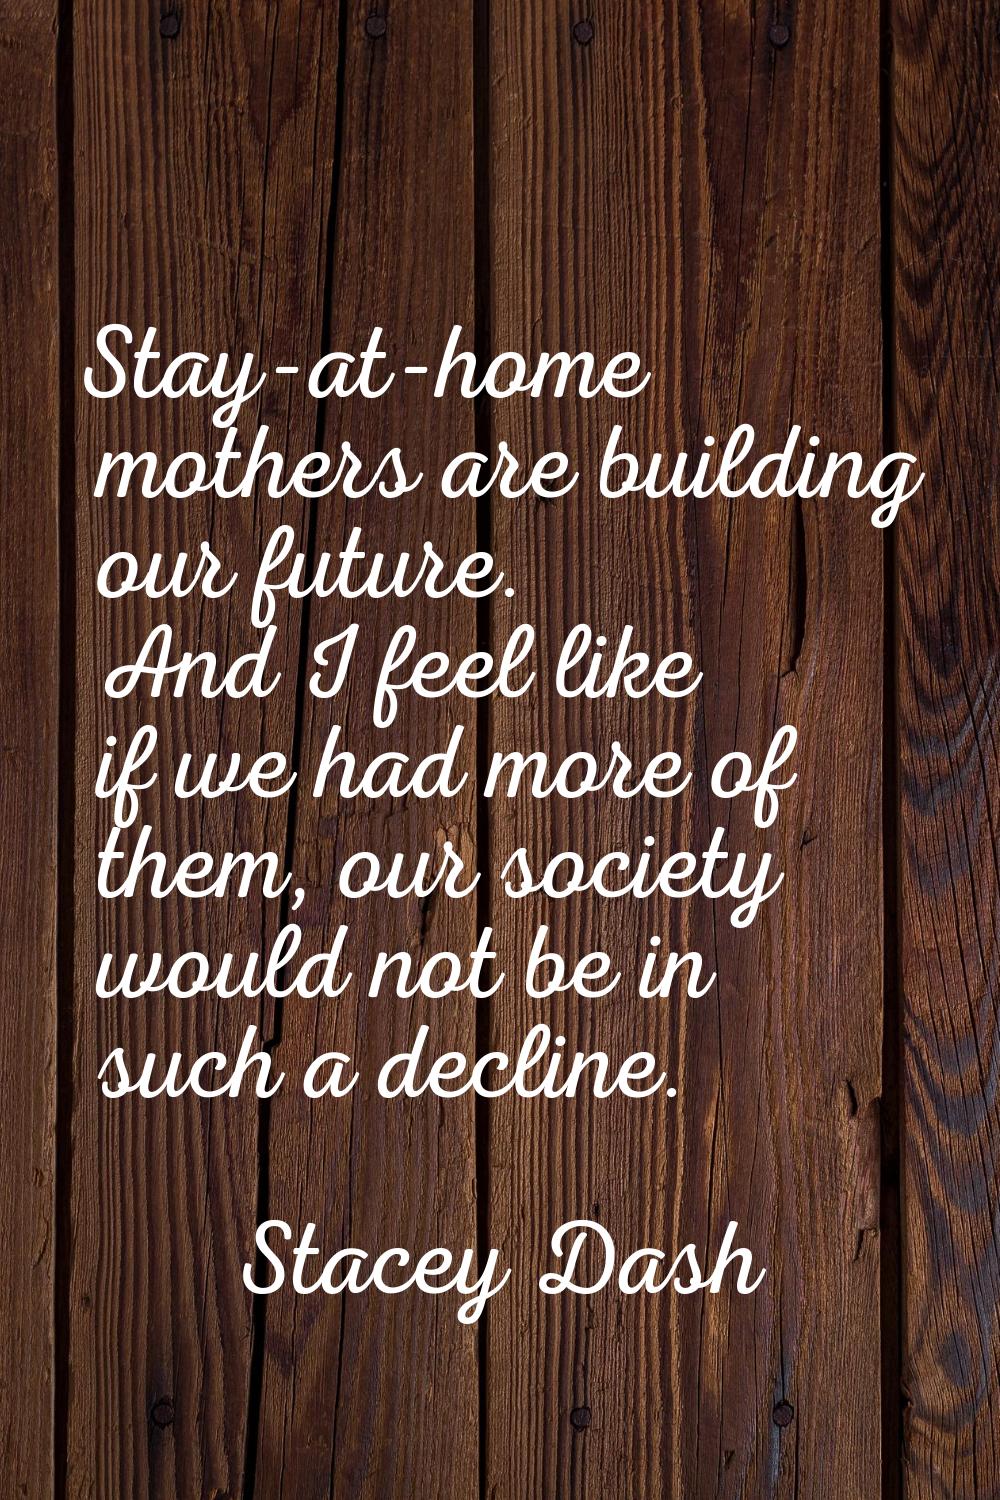 Stay-at-home mothers are building our future. And I feel like if we had more of them, our society w